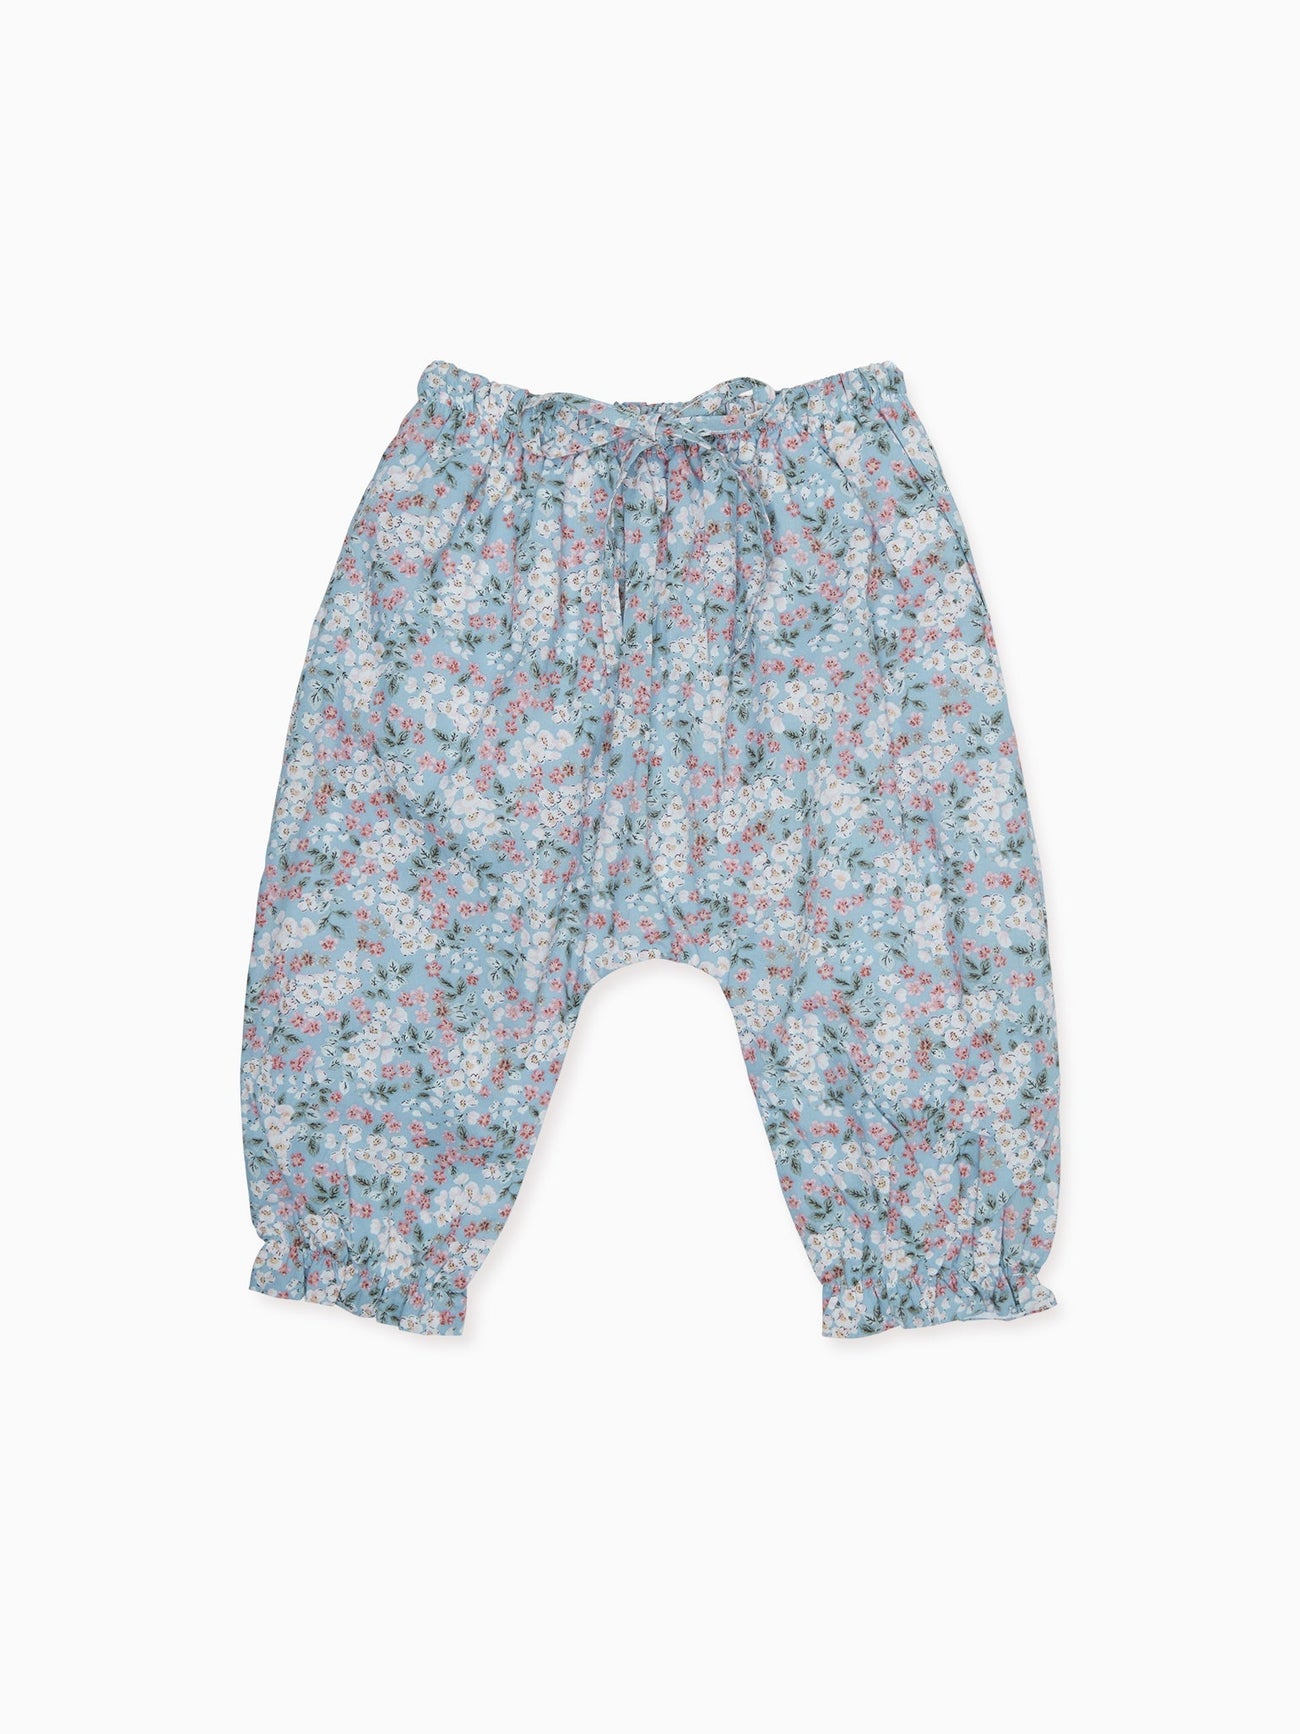 Light Blue Floral Forna Cotton Baby Girl Pants